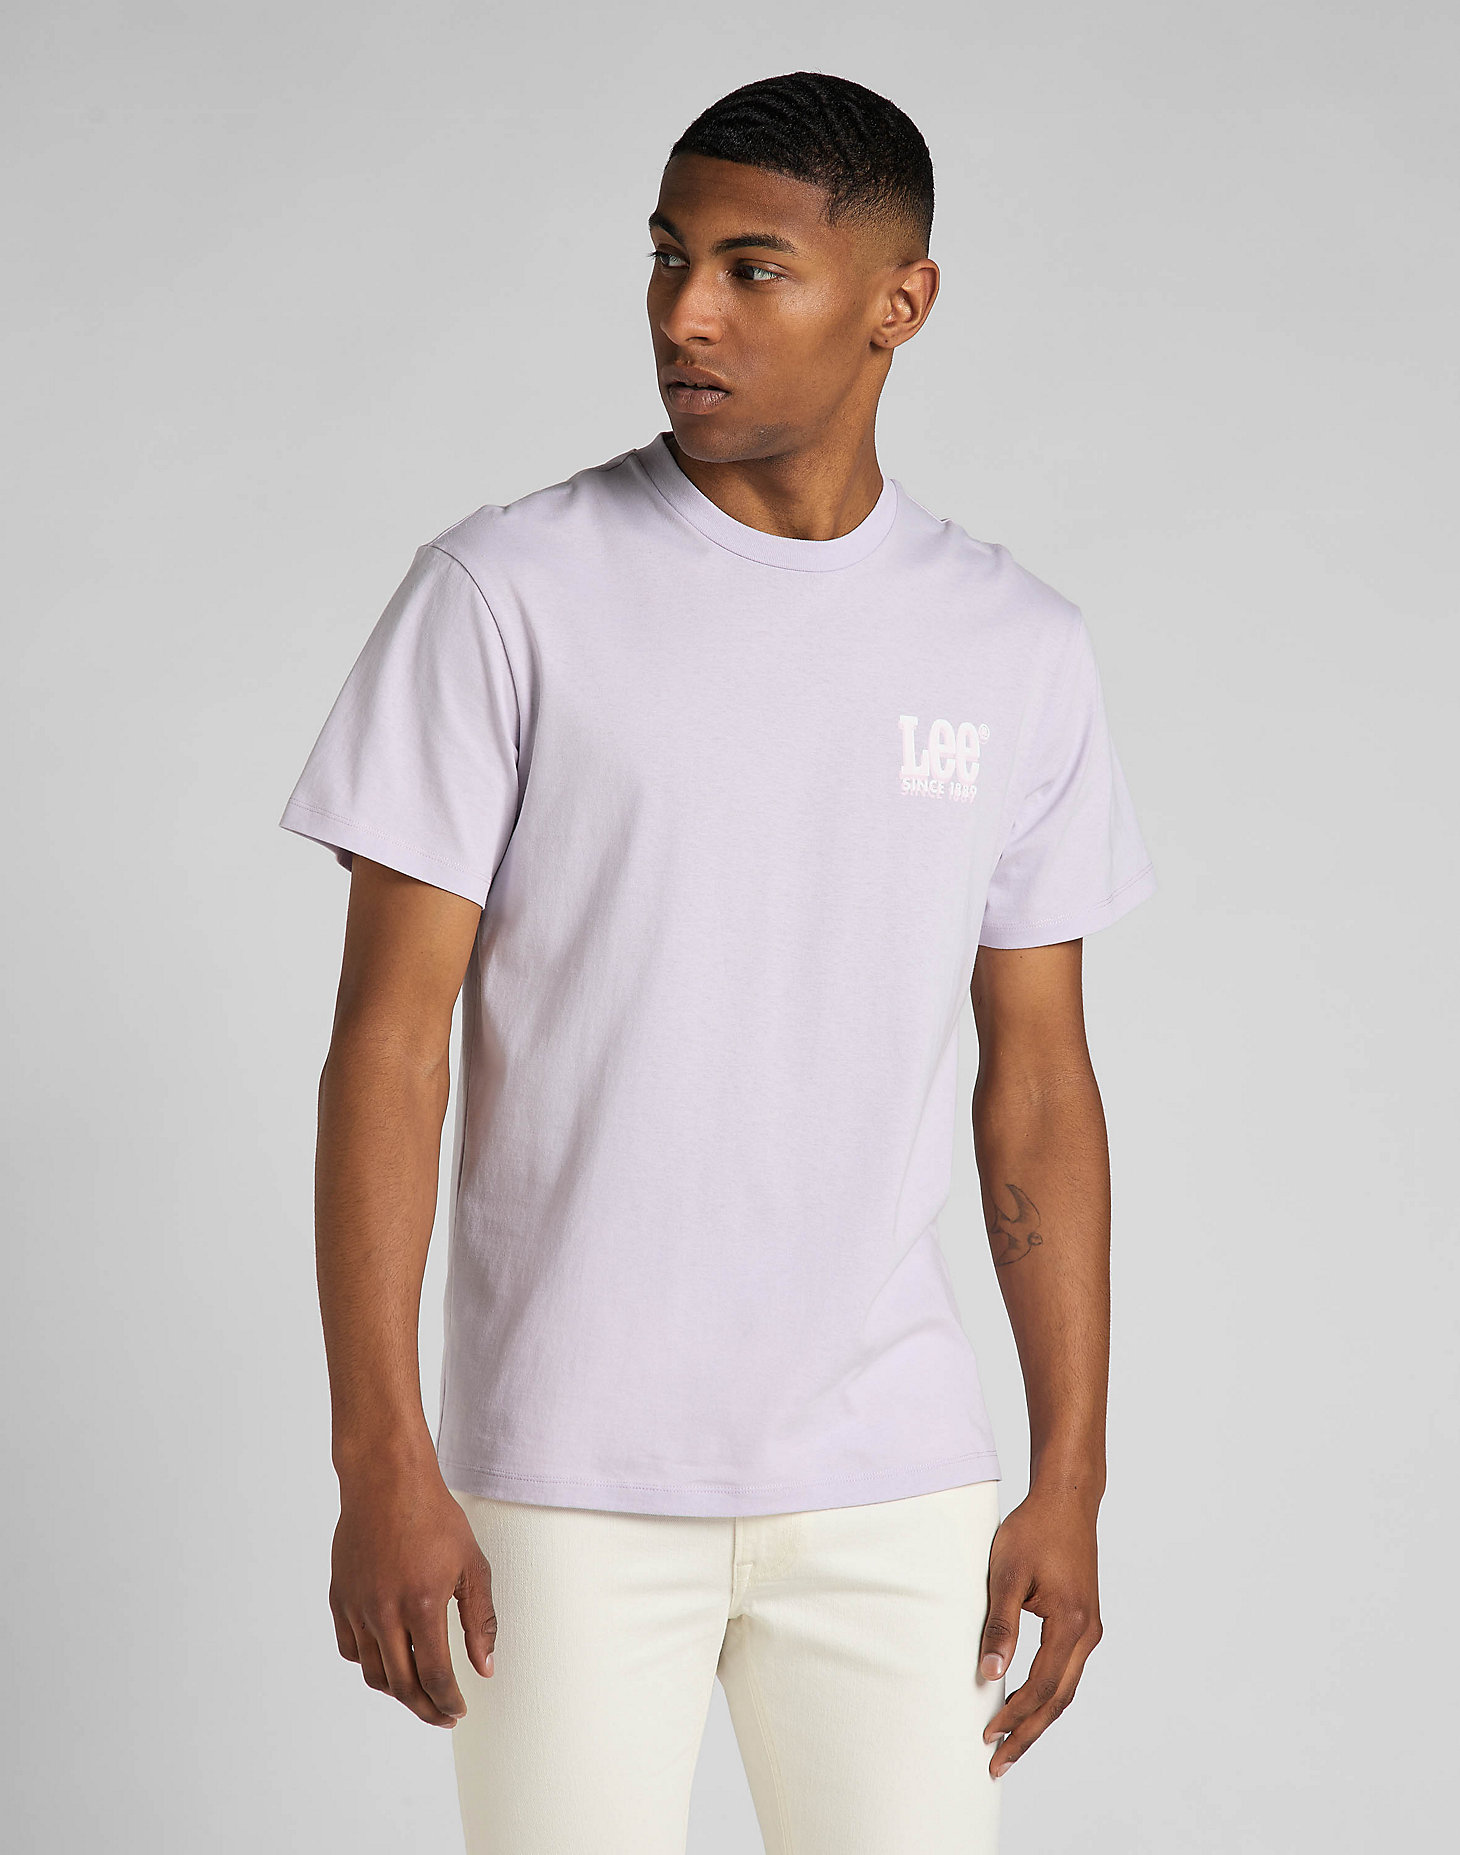 Short Sleeve Painter Ad Tee in Misty Lilac main view